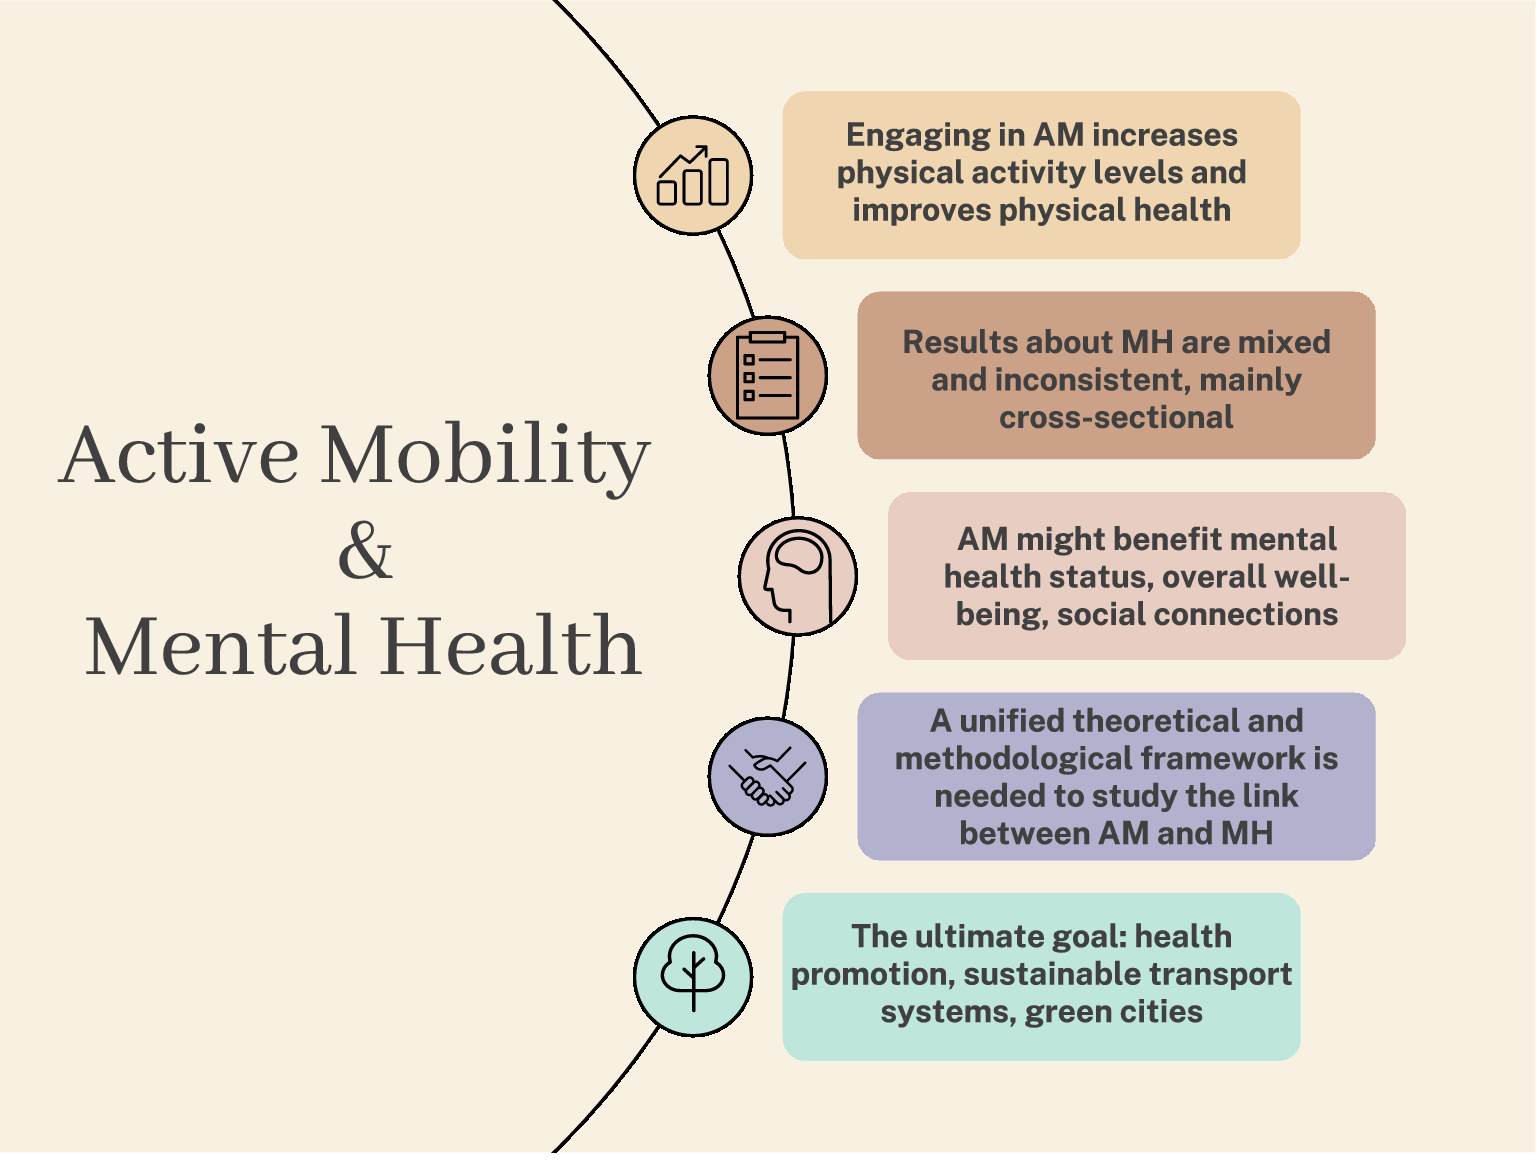 Physical activity and mental health: Types of physical activity